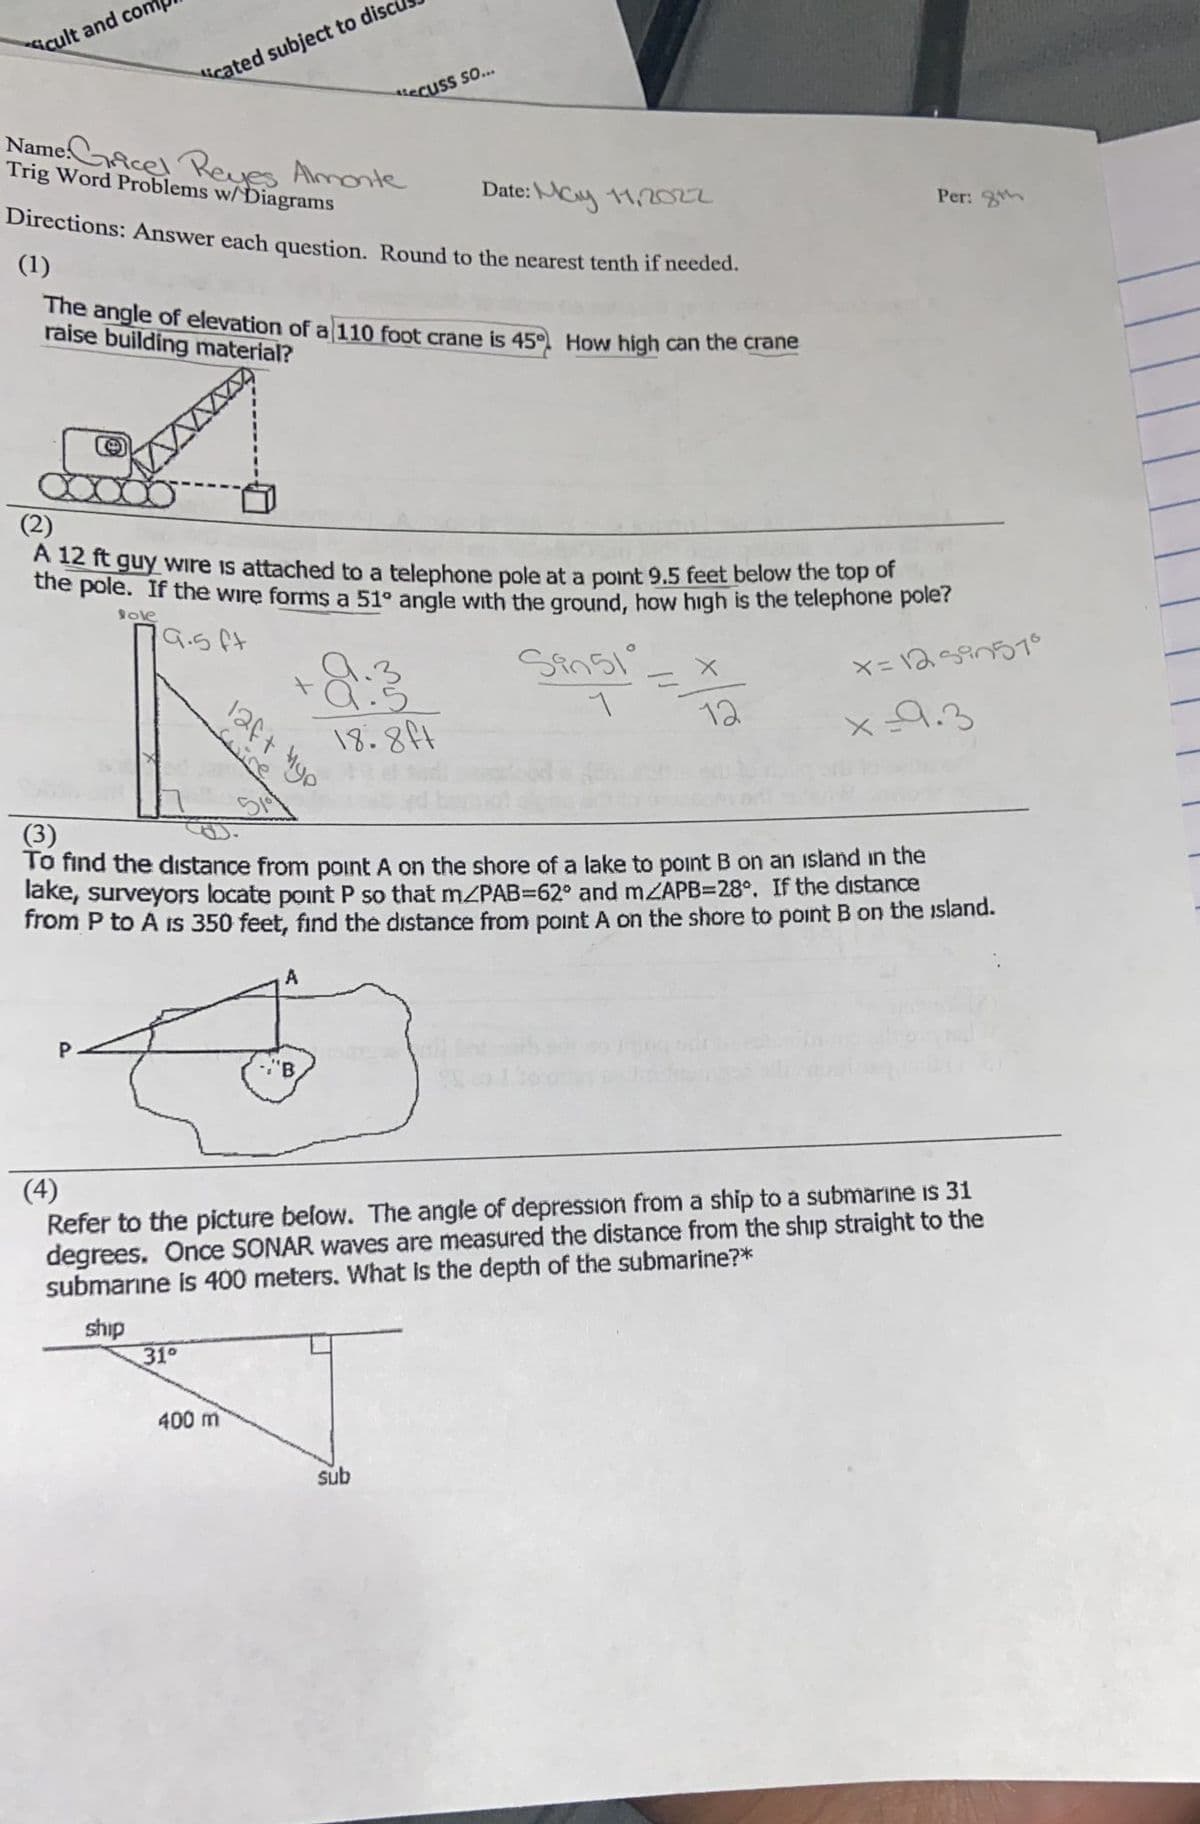 icult and com
icated subject to disc
ecuss so...
NameAcel PReves Almonte
Trig Word Problems w/Diagrams
Date:
e:\Nay 11,2022
Directions: Answer each question. Round to the nearest tenth if needed.
Per:
(1)
he angle of elevation of a 110 foot crane is 45 How high can the crane
raise building material?
(2)
A 12 ft guy Wire is attached to a telephone pole at a point 9.5 feet below the top or
dhe pole. If the wire forms a 51° angle with the ground, how high is the telephone pole?
ole
19.5ft
18.84
12
x9.3
(3)
To find the dıstance from point A on the shore of a lake to point B on an island in the
lake, surveyors locate point P so that m/PAB=62° and mZAPB=28°. If the distance
from P to A is 350 feet, find the distance from point A on the shore to point B on the island.
"B
(4)
Refer to the picture below. The angle of depression from a ship to a submarıne is 31
degrees. Once SONAR waves are measured the distance from the ship straight to the
submarıne is 400 meters. What is the depth of the submarine?*
ship
31°
400 m
sub
